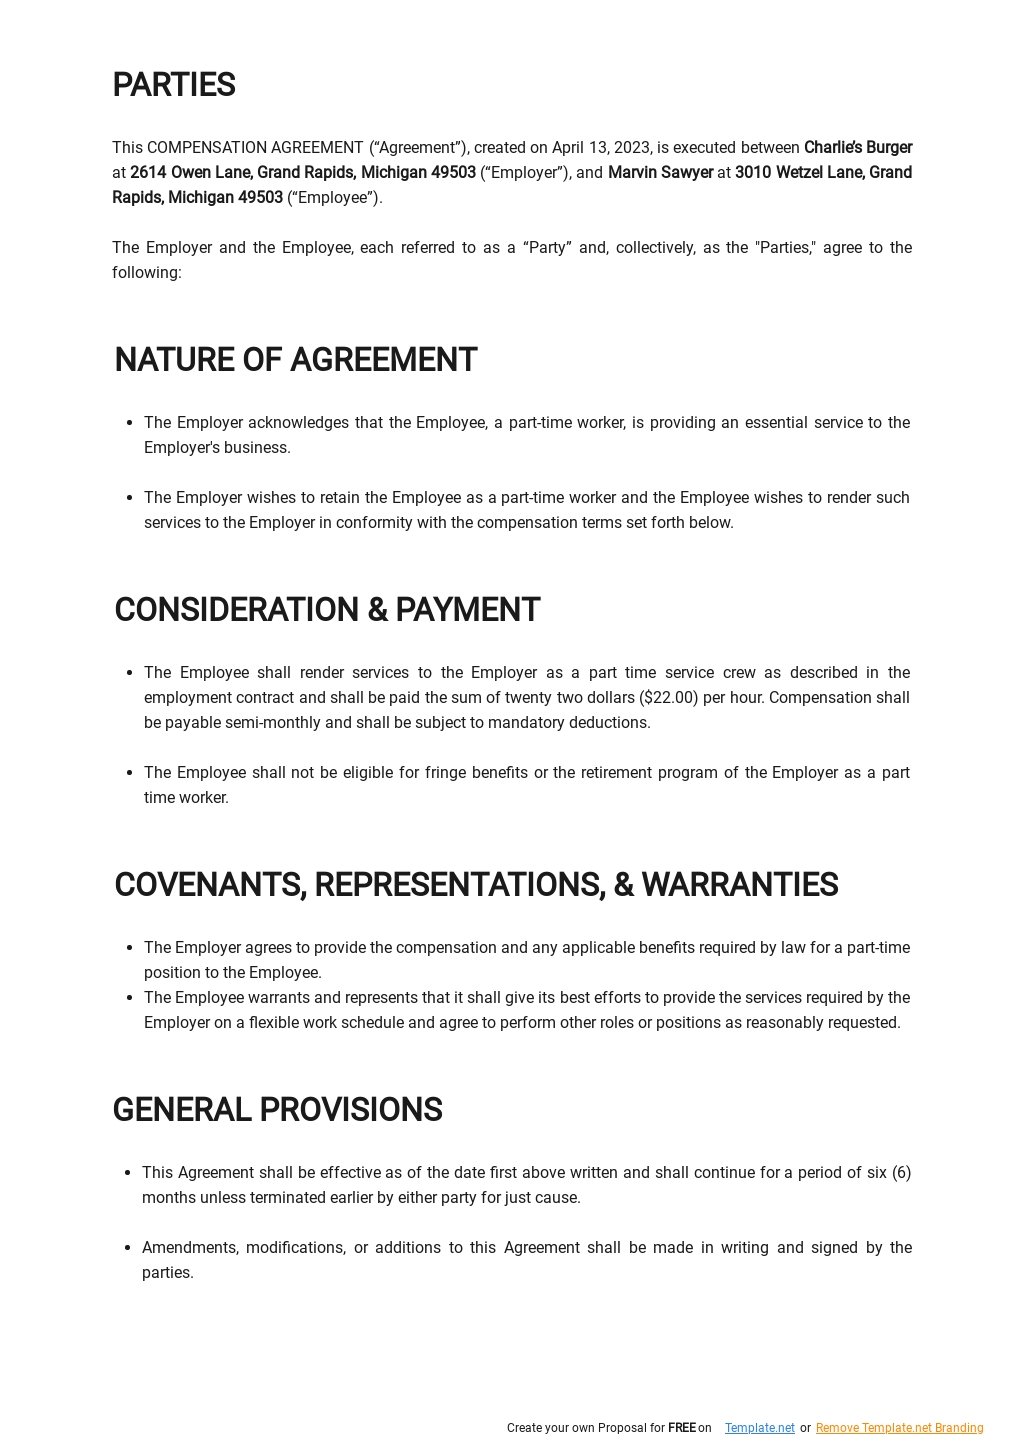 Basic Compensation Agreement Template Google Docs, Word, Apple Pages